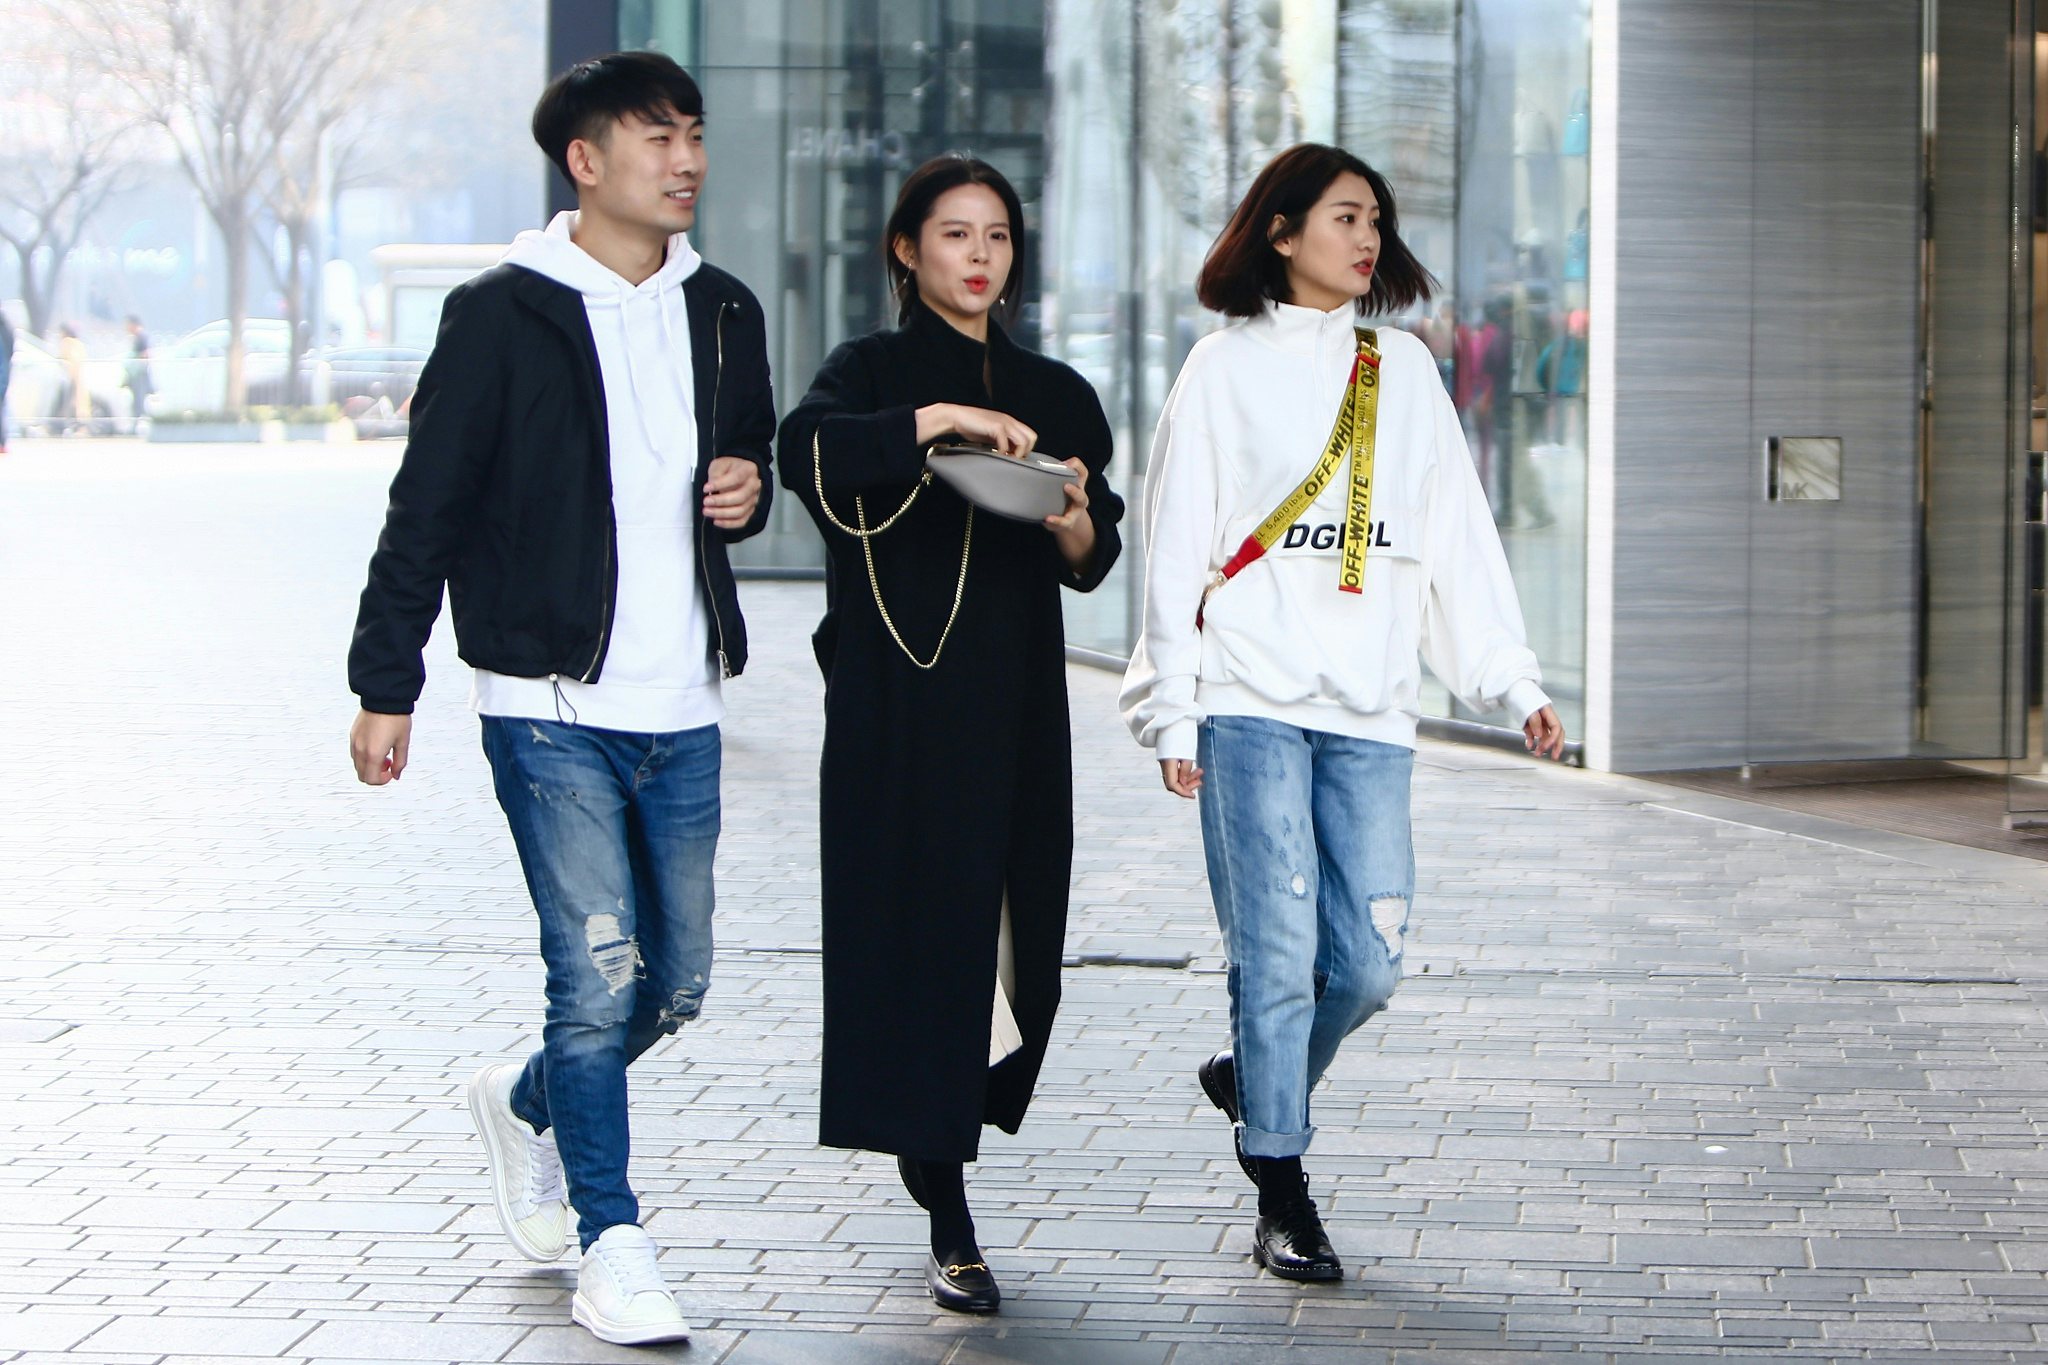 Streetwear fashion has become mainstream among today's Chinese fashionistas. Photo: VCG